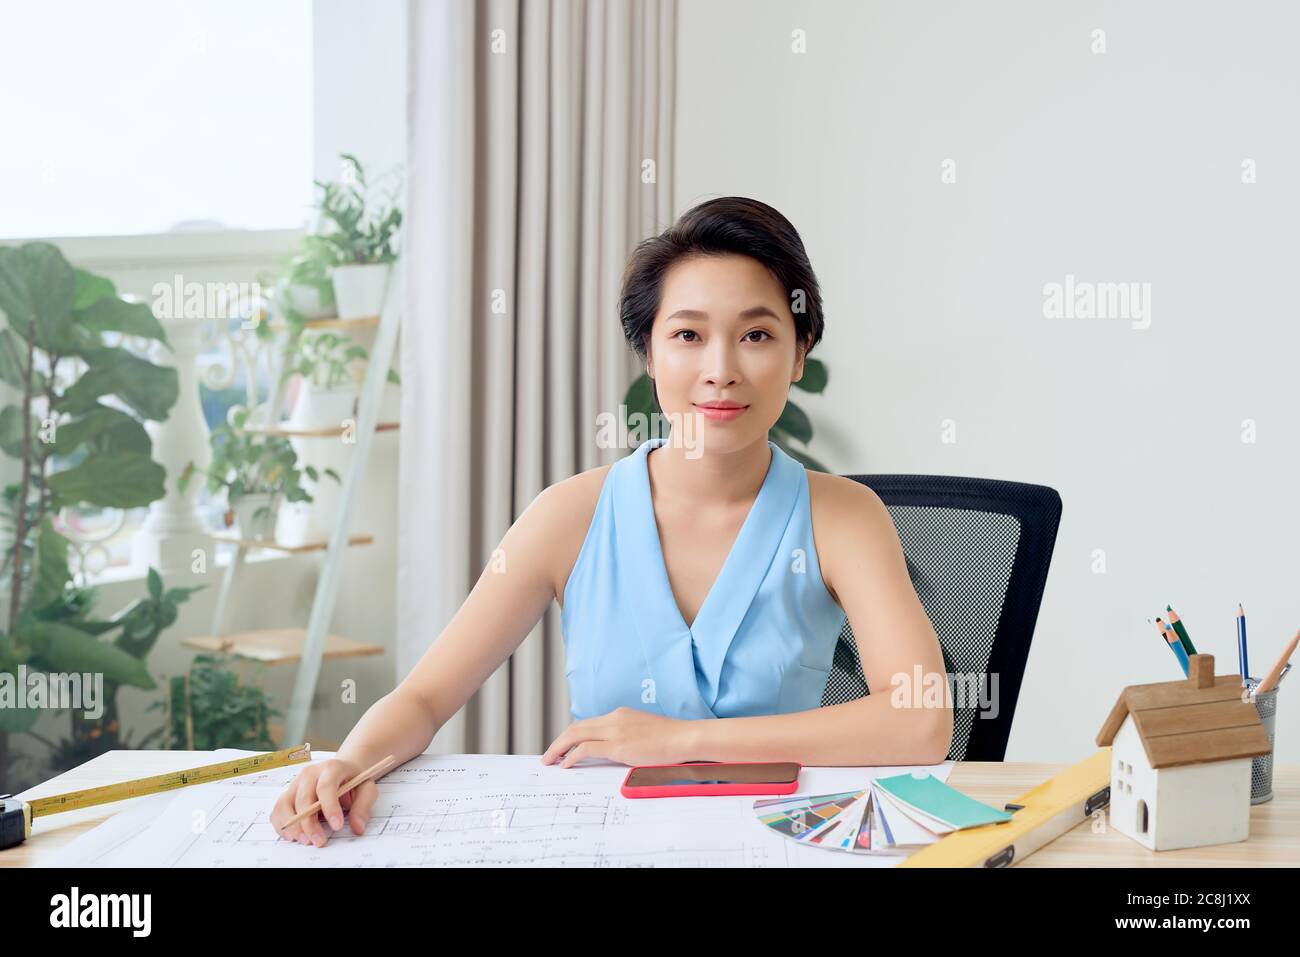 Portrait of young Asian architect sitting in her office Stock Photo